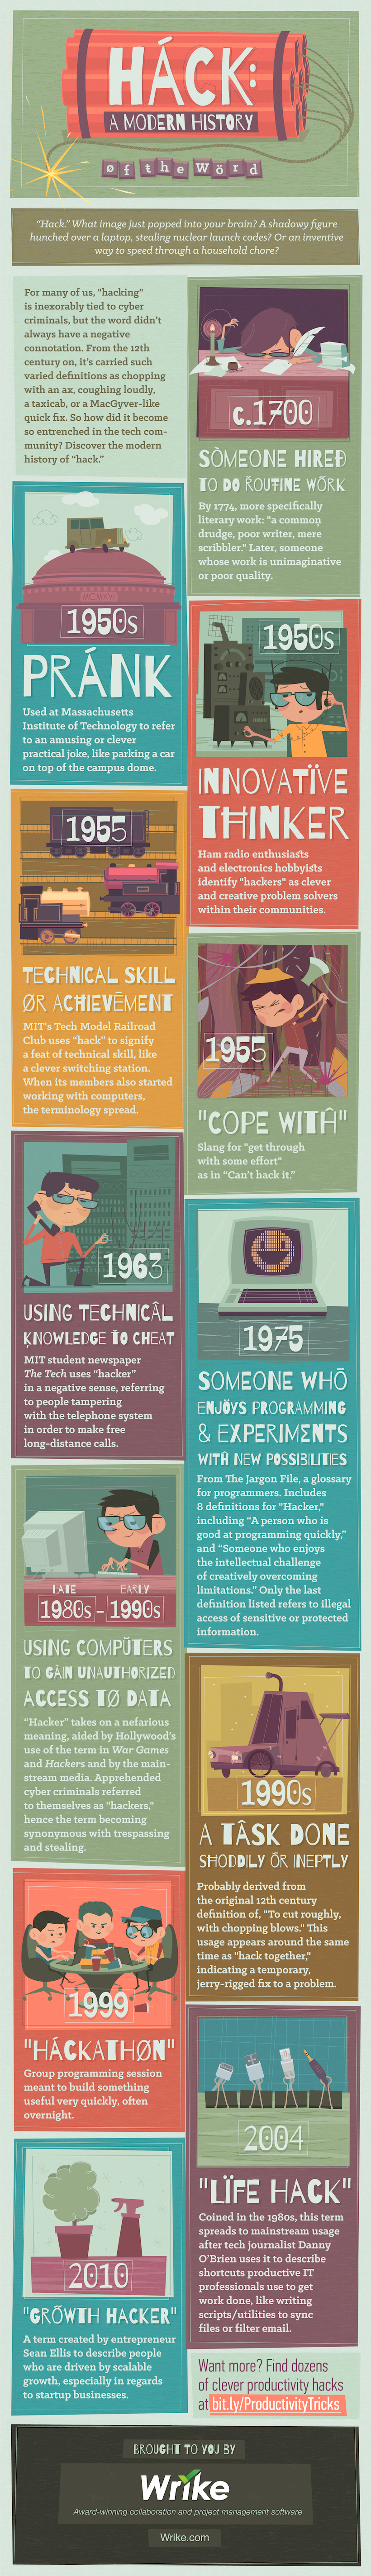 The History of the Word ‘Hack’ - by Wrike project management tools